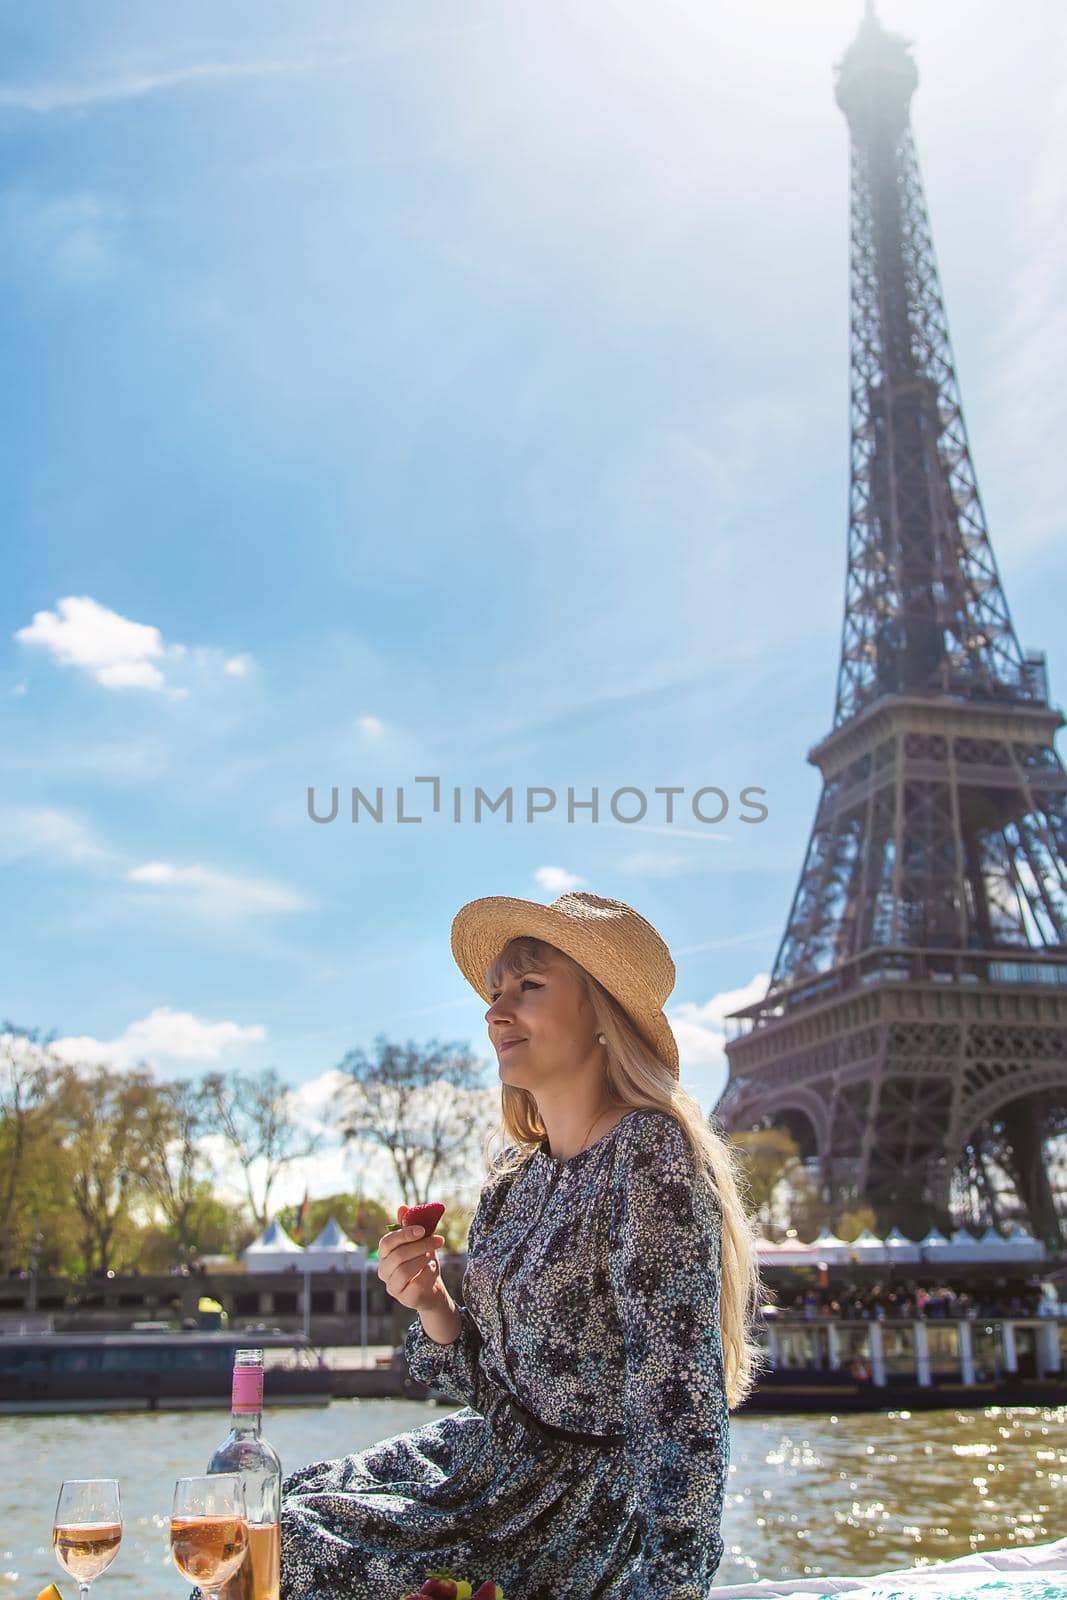 A woman near the Eiffel Tower drinks wine. Selective focus. People.